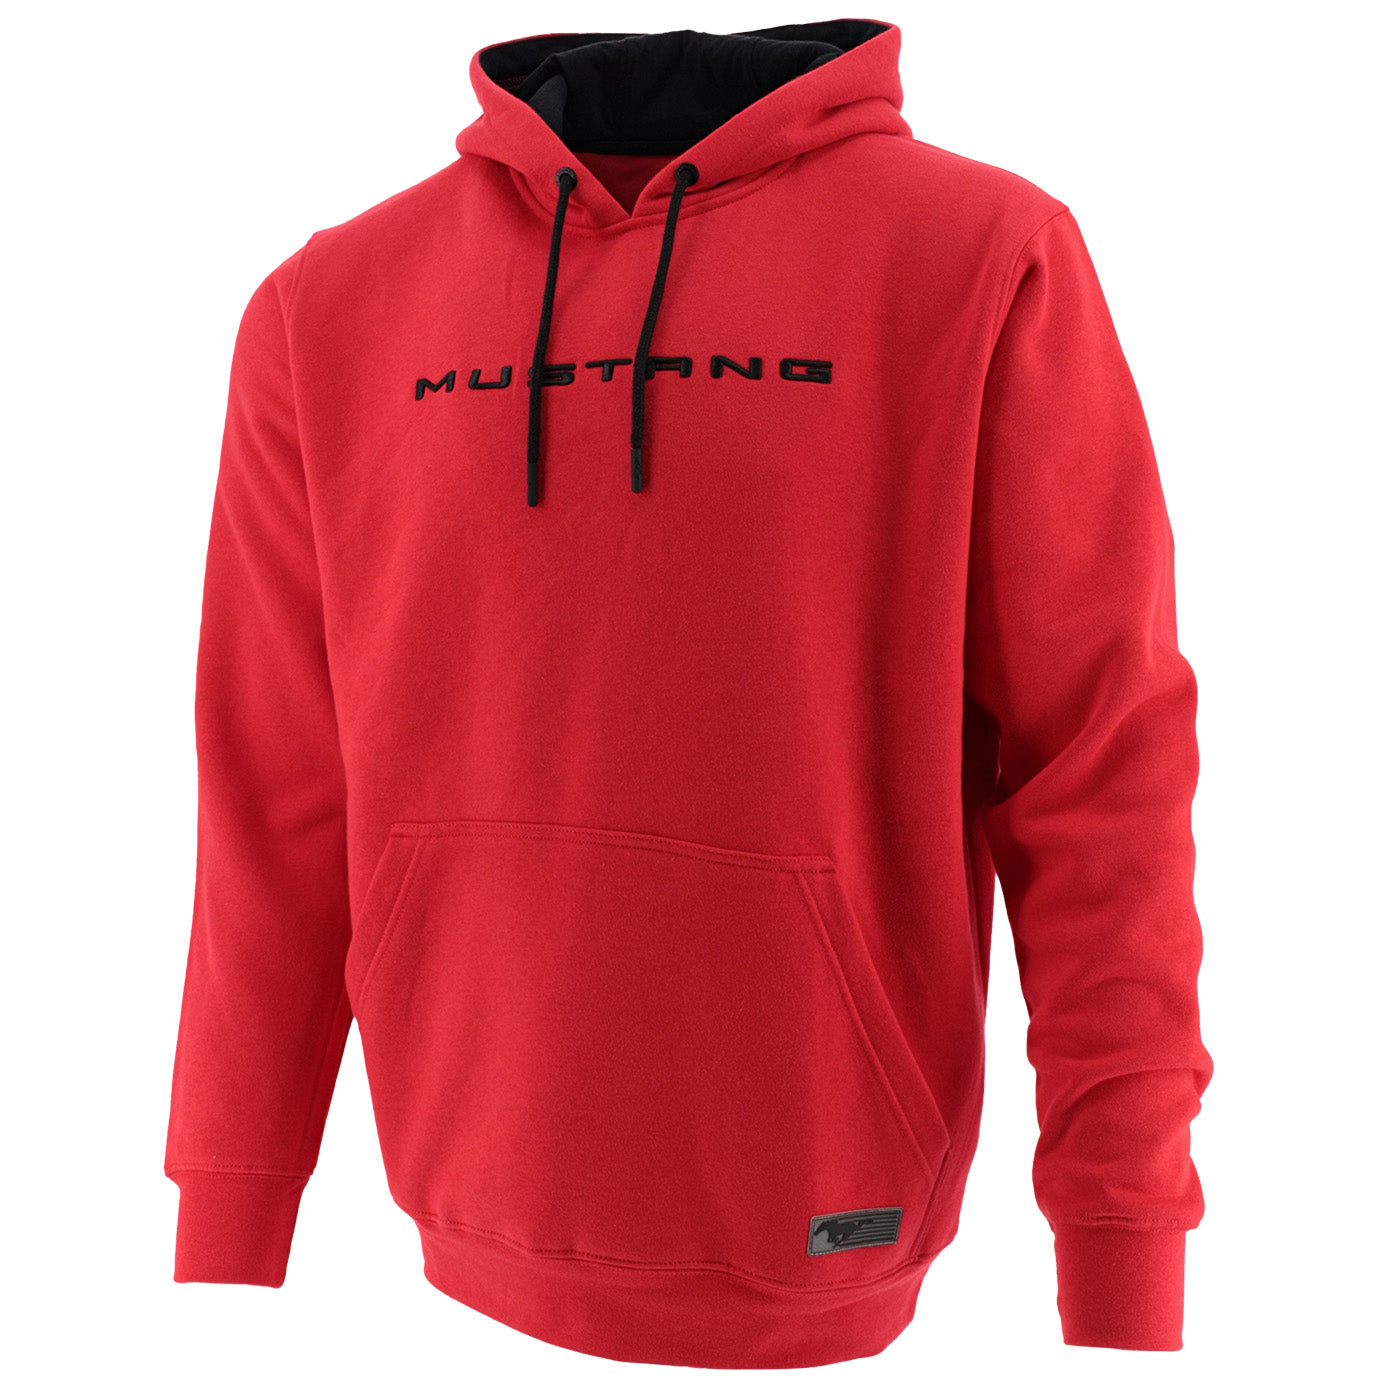 Ford Mustang Men's Pullover Hooded Fleece- Official Ford Merchandise